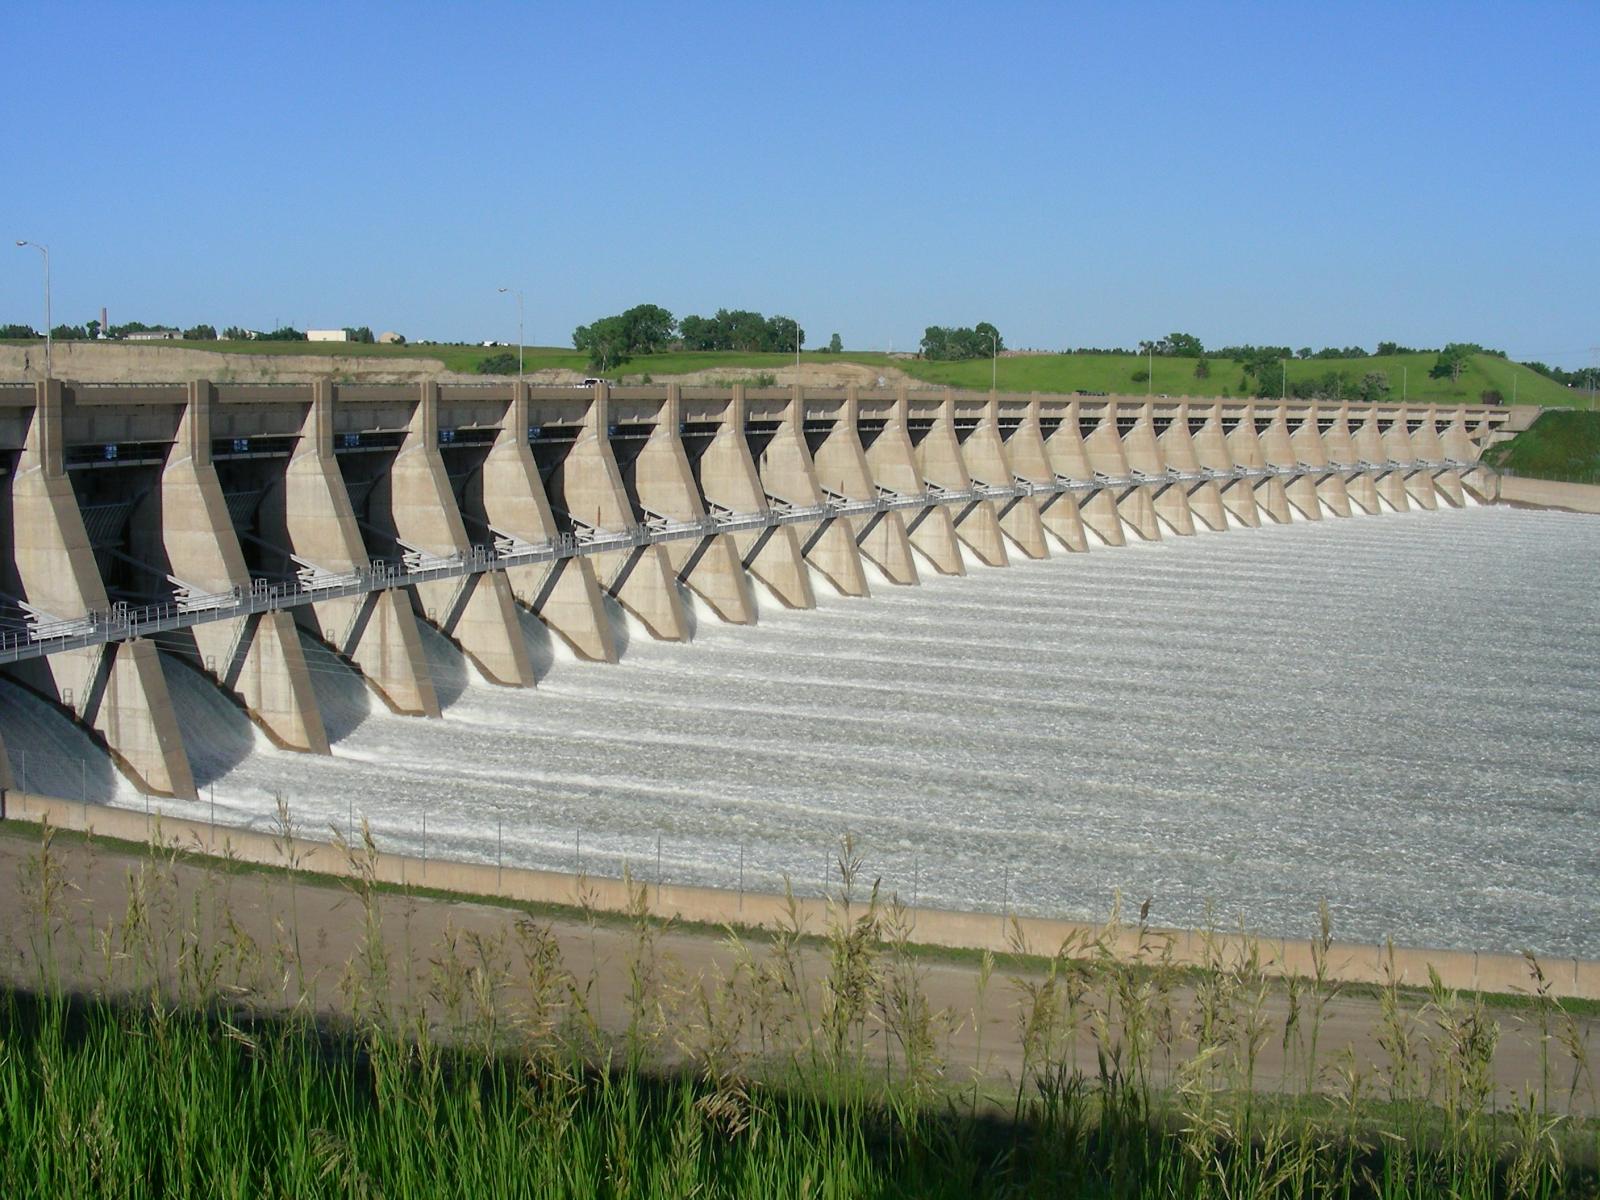 Garrison Dam spillway gates open for the first time in histroy since the dam was built in mid 50's